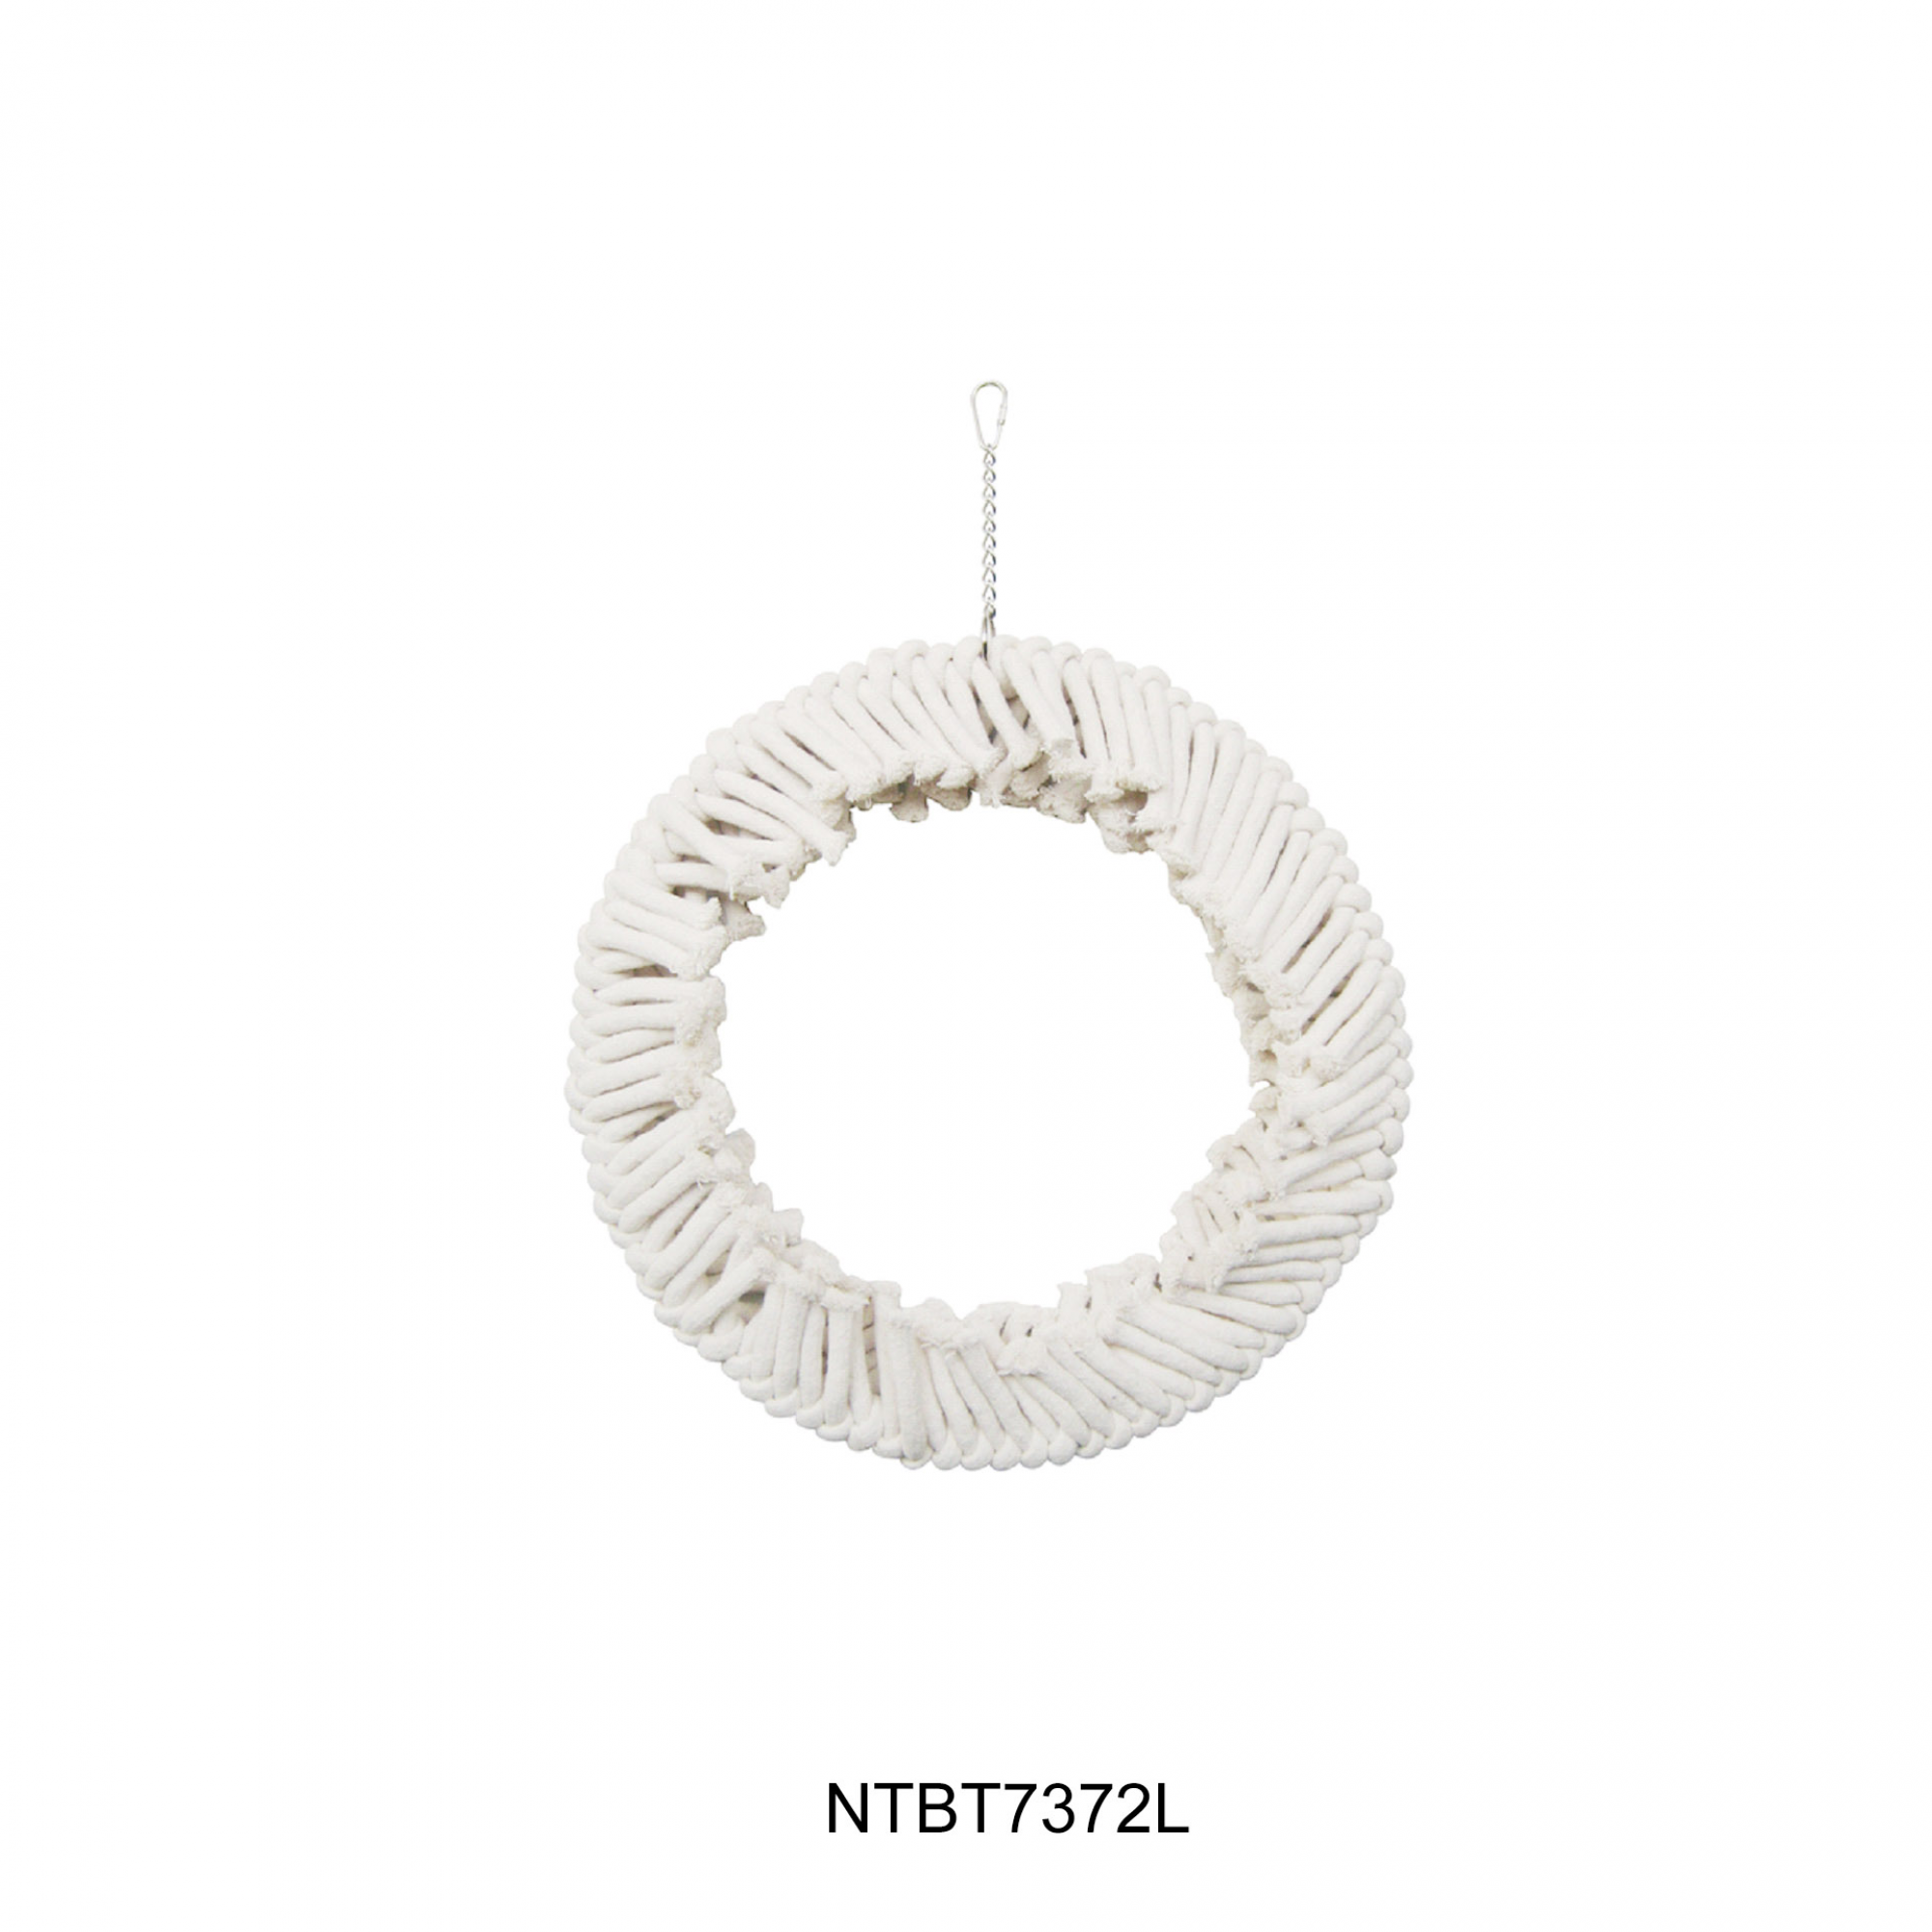 OPSP - 7372L - Ring Shaped Bird Toy 40cm